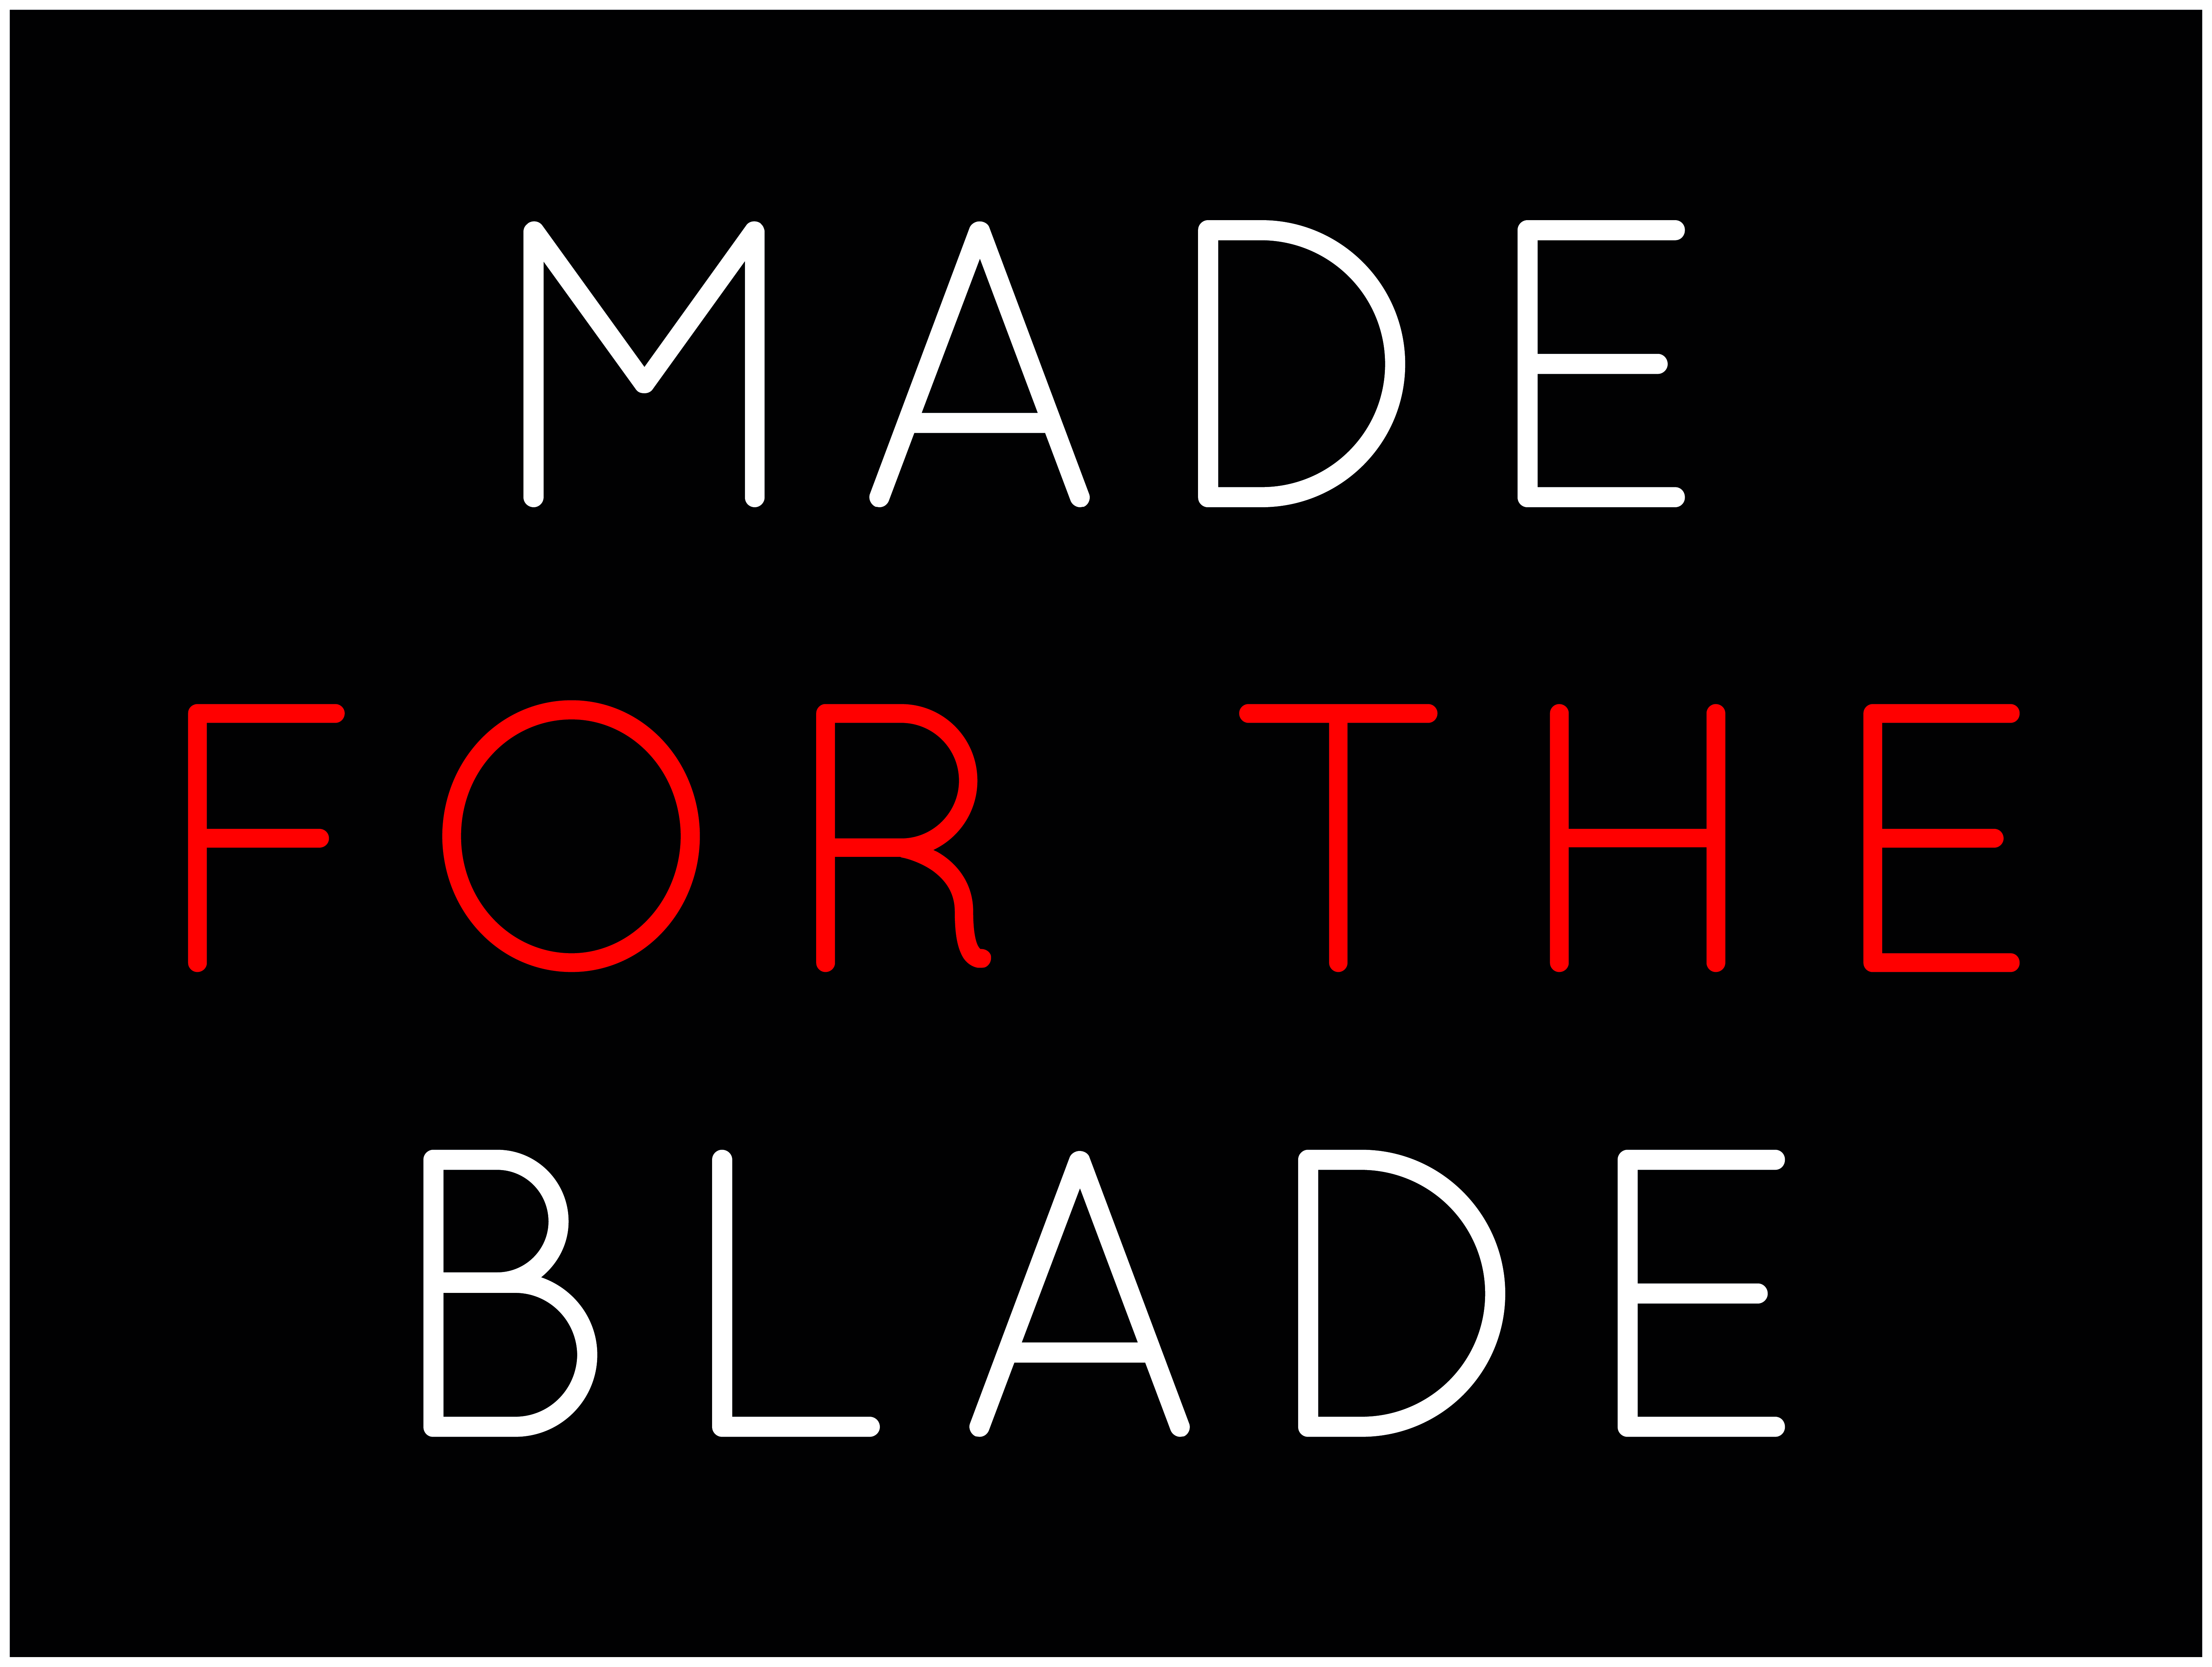 Made For The Blade